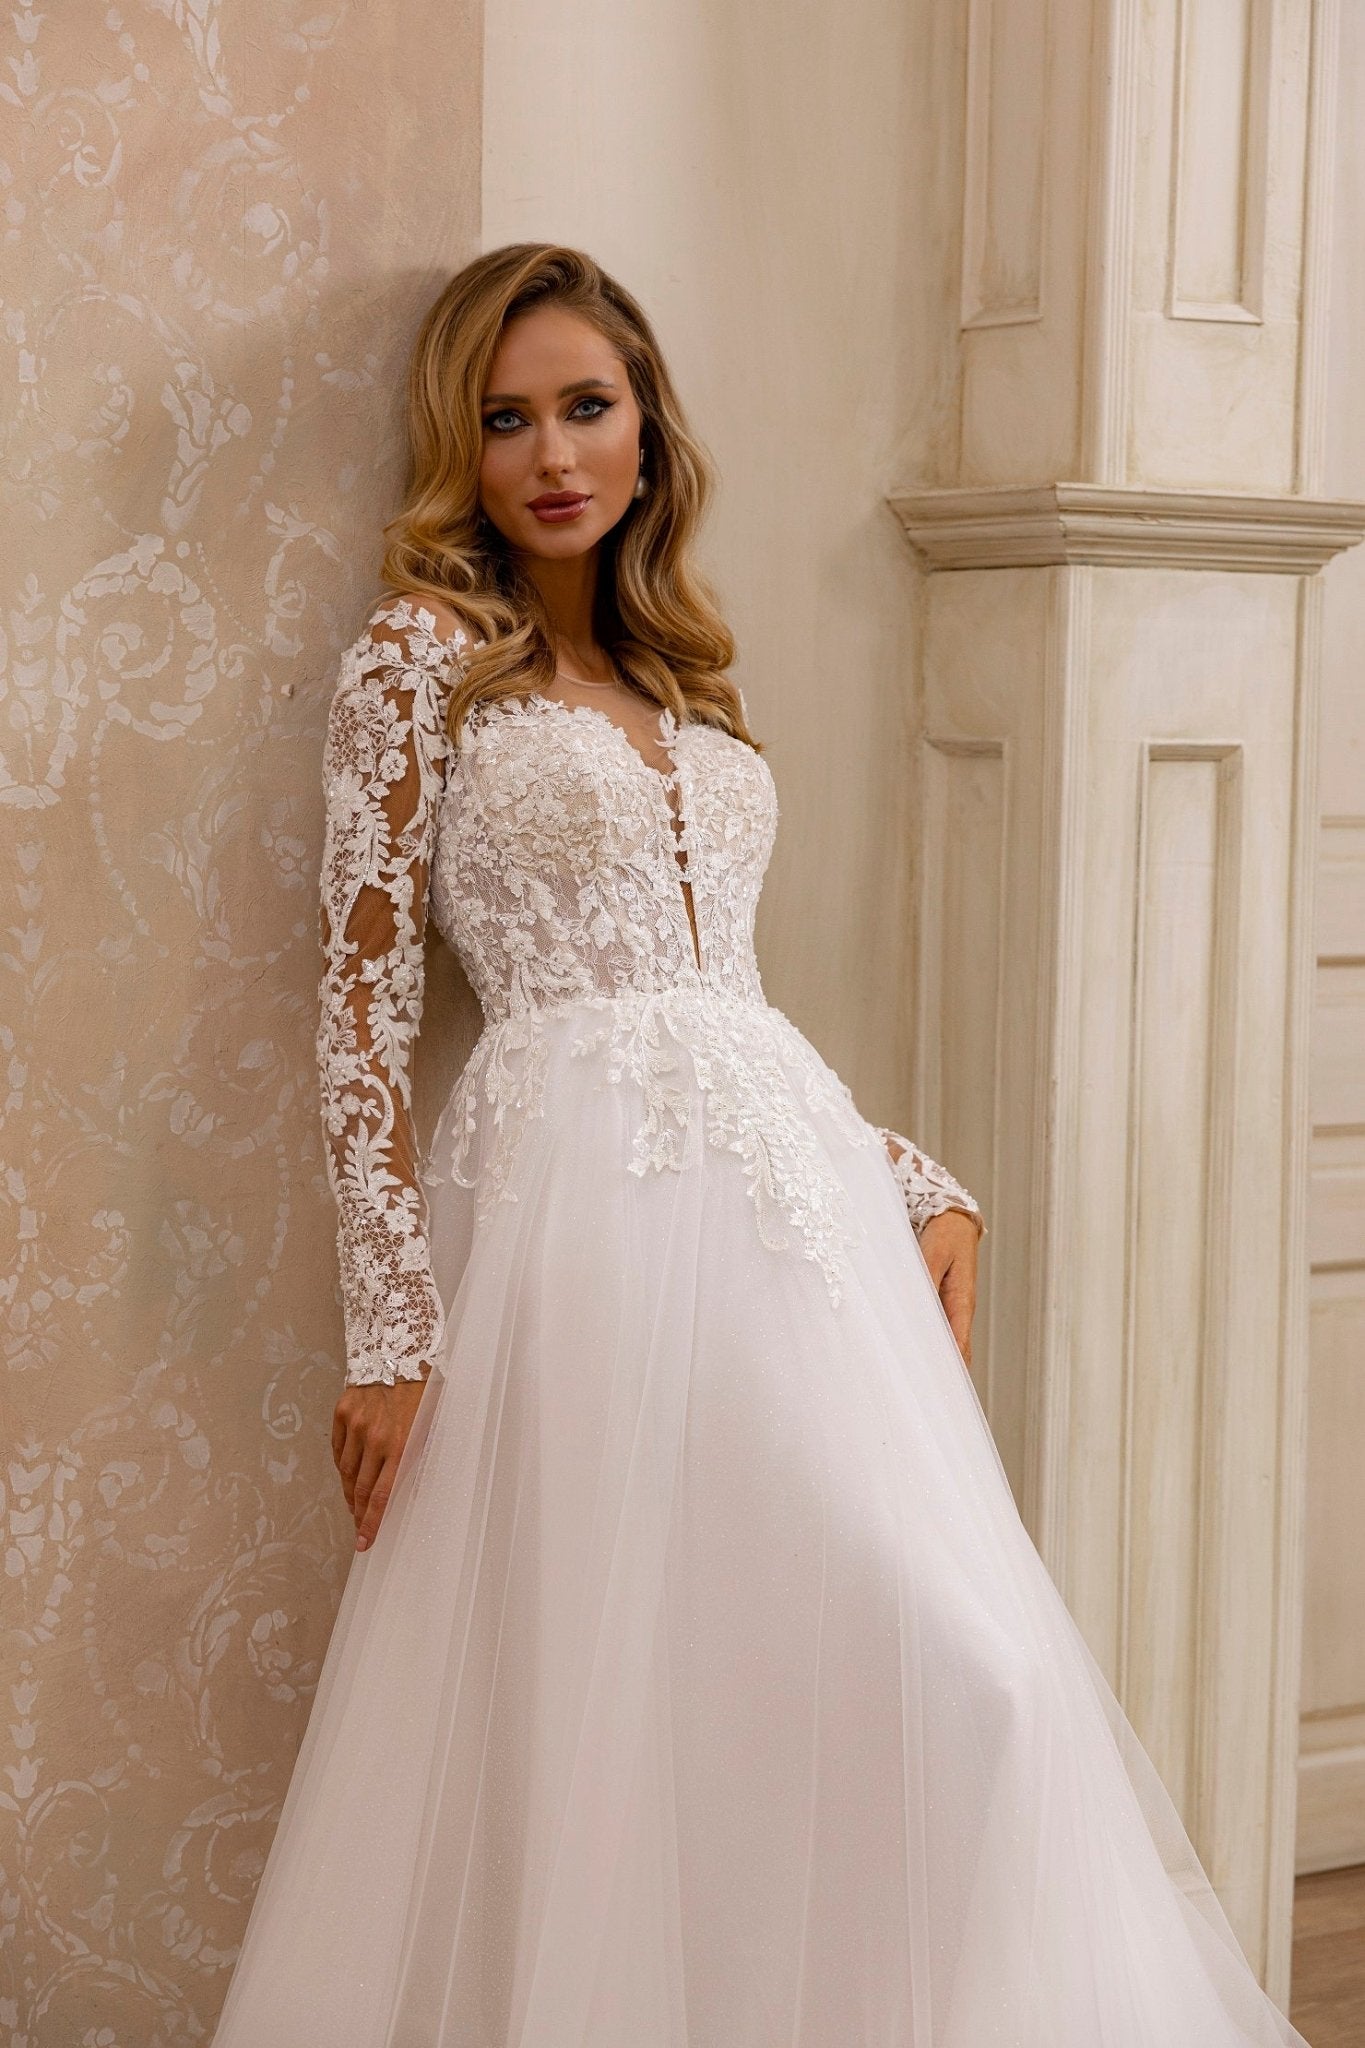 Elegant A-Line Bridal Gown with Lace Detail and Plunging Neckline - WonderlandByLilian